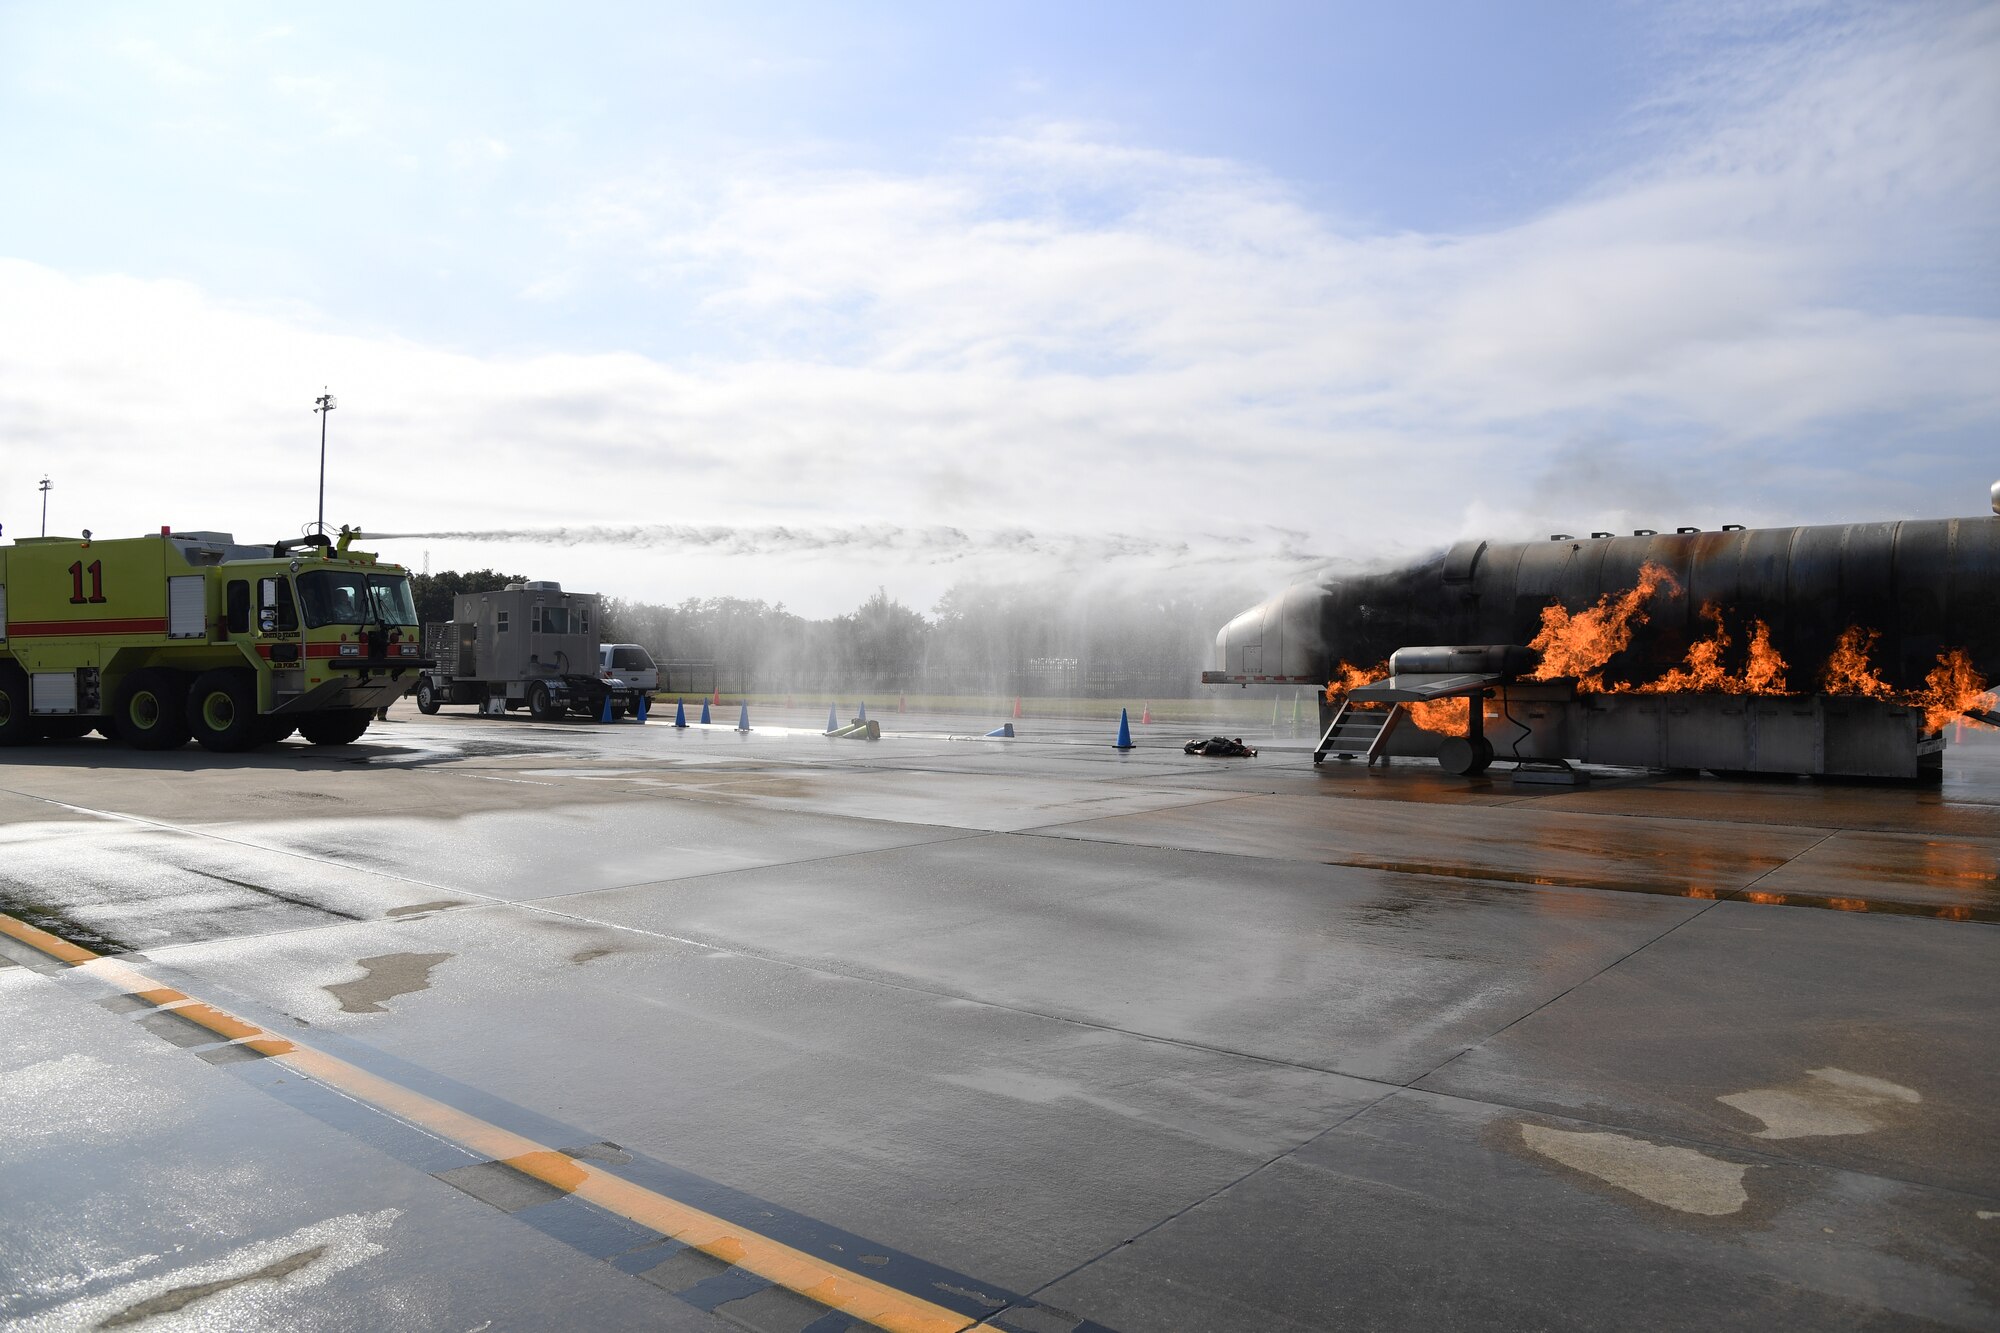 Keesler firefighters operate a fire truck to extinguish a fire on a mock C-123 training device during an aircraft rescue fire fighting training exercise at Keesler Air Force Base, Mississippi, Nov. 6, 2019. The five-day joint agency training allowed the Keesler Fire Department and the Gulfport Combat Readiness Training Center Fire Department to meet the semi-annual training requirement to practice aircraft rescue and live fire training evolutions. (U.S. Air Force photo by Kemberly Groue)